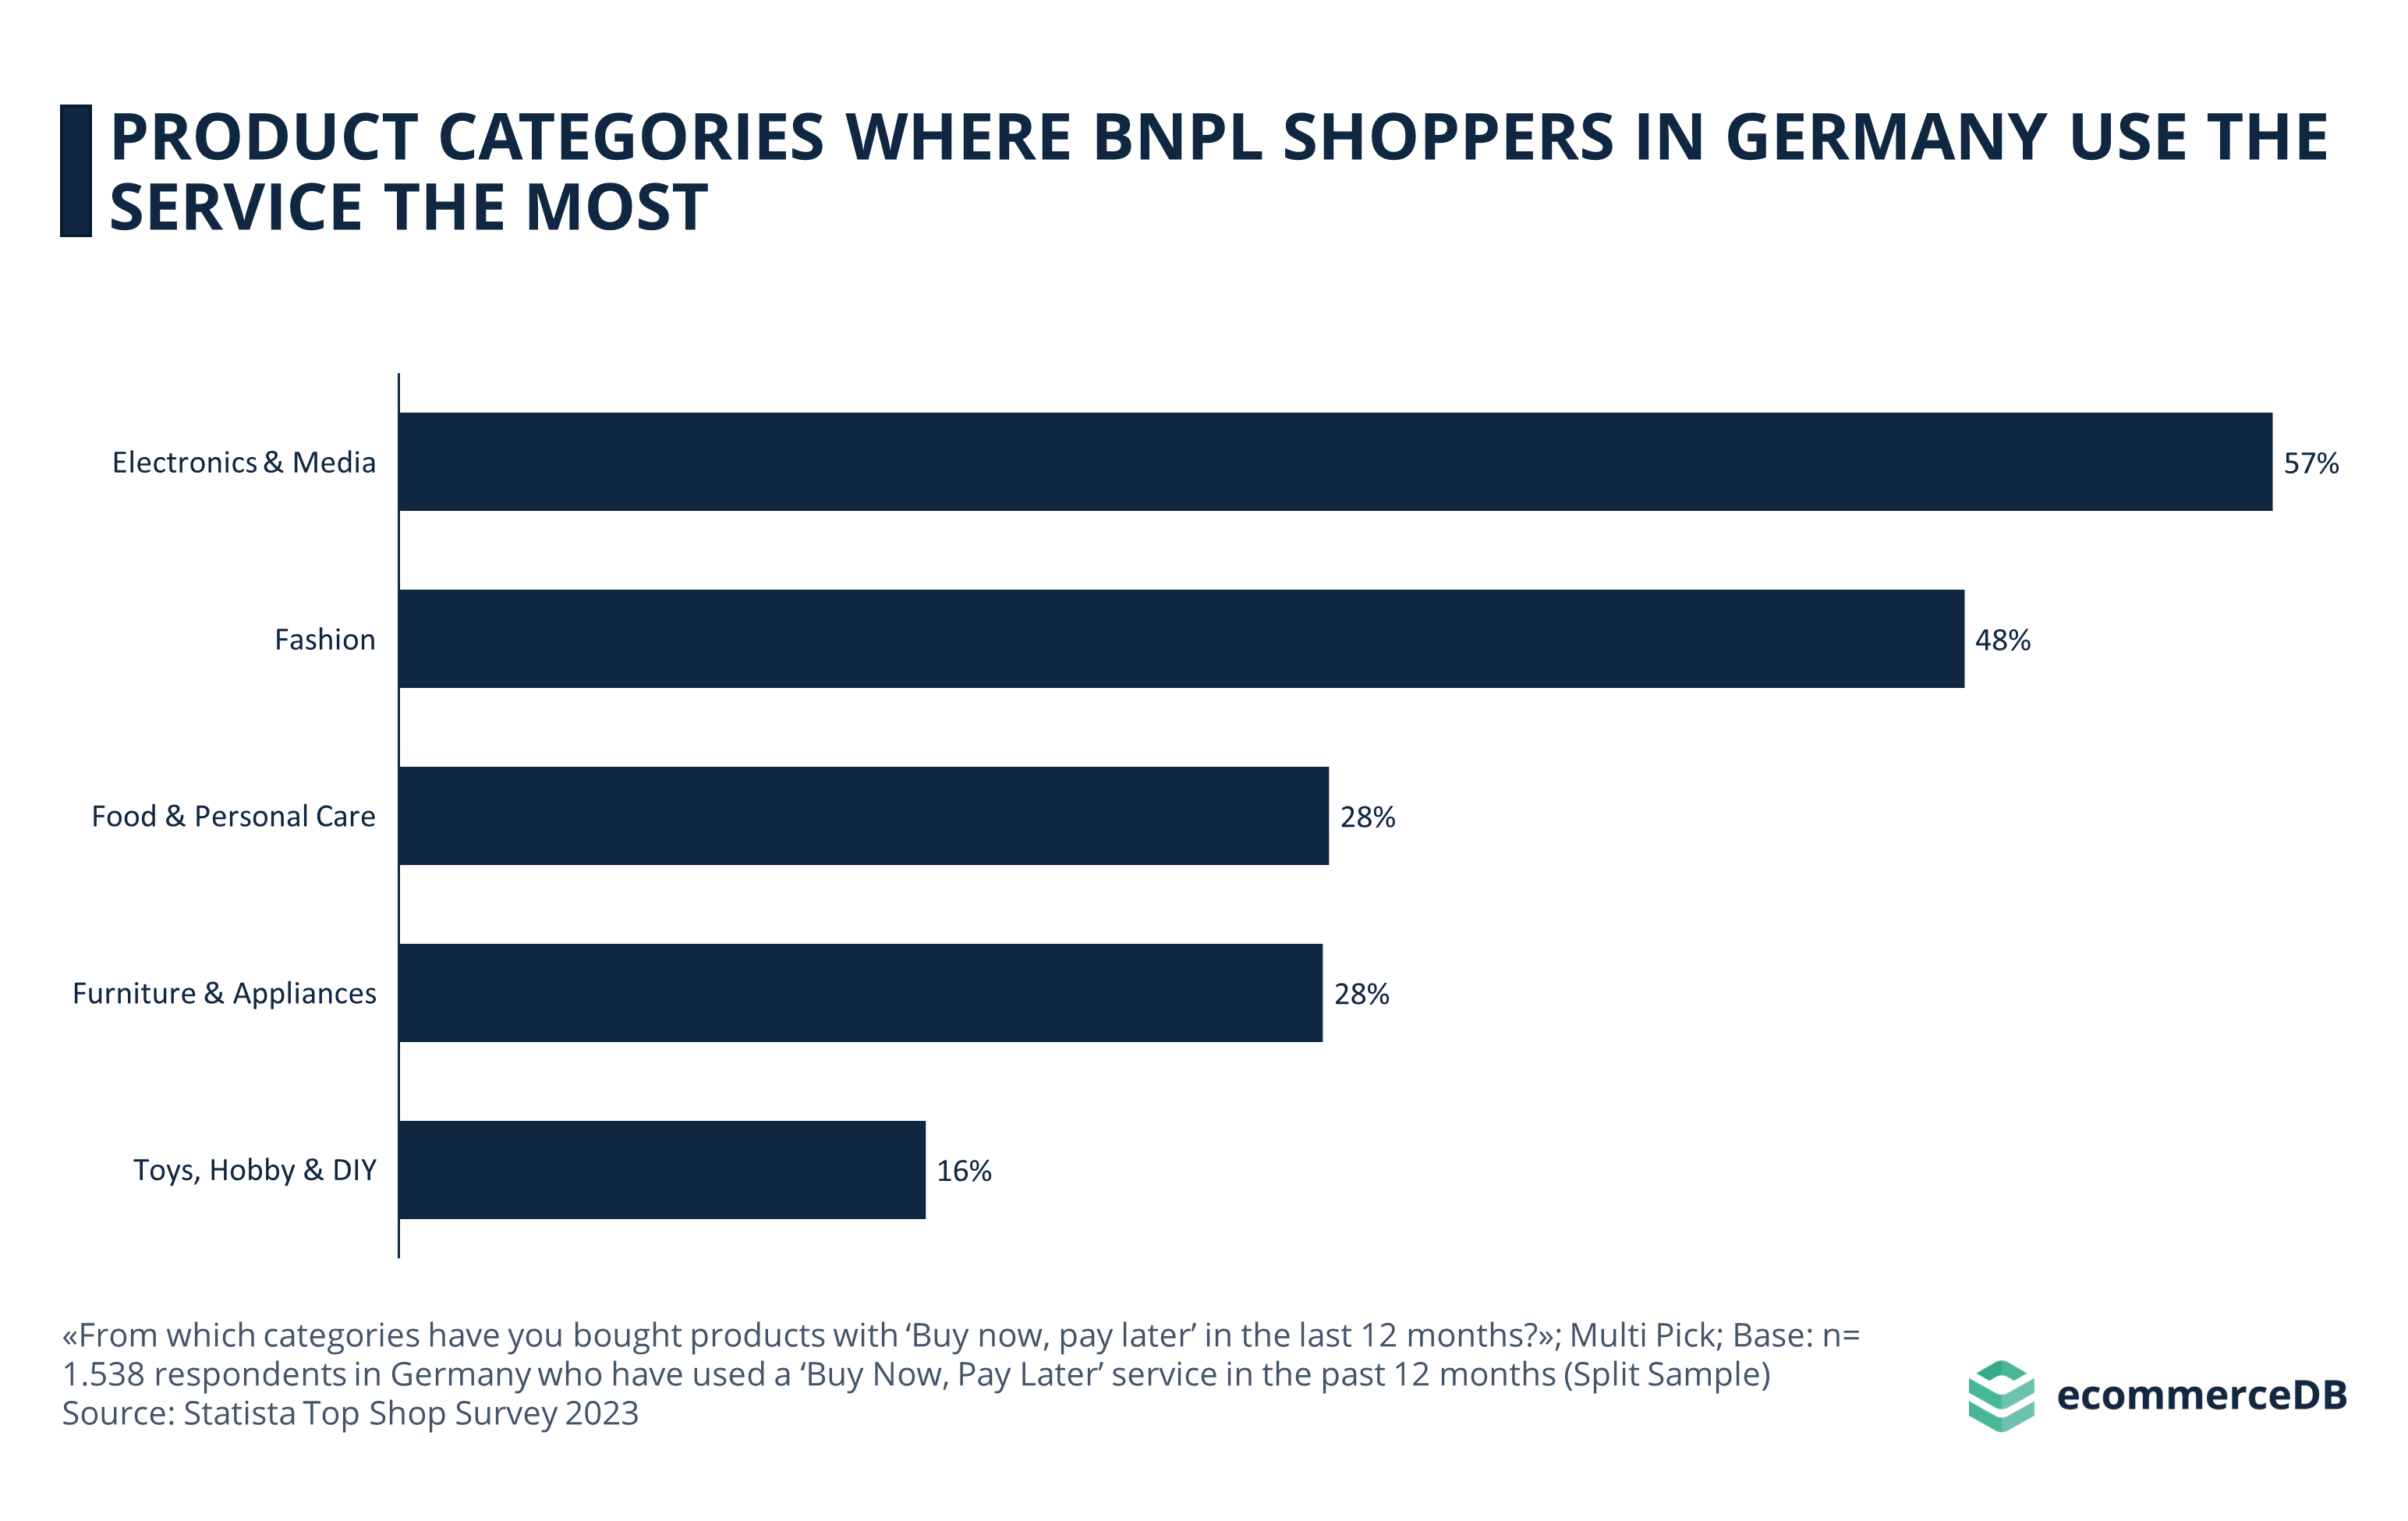 PRODUCT CATEGORIES WHERE BNPL SHOPPERS IN GERMANY USE THE SERVICE THE MOST